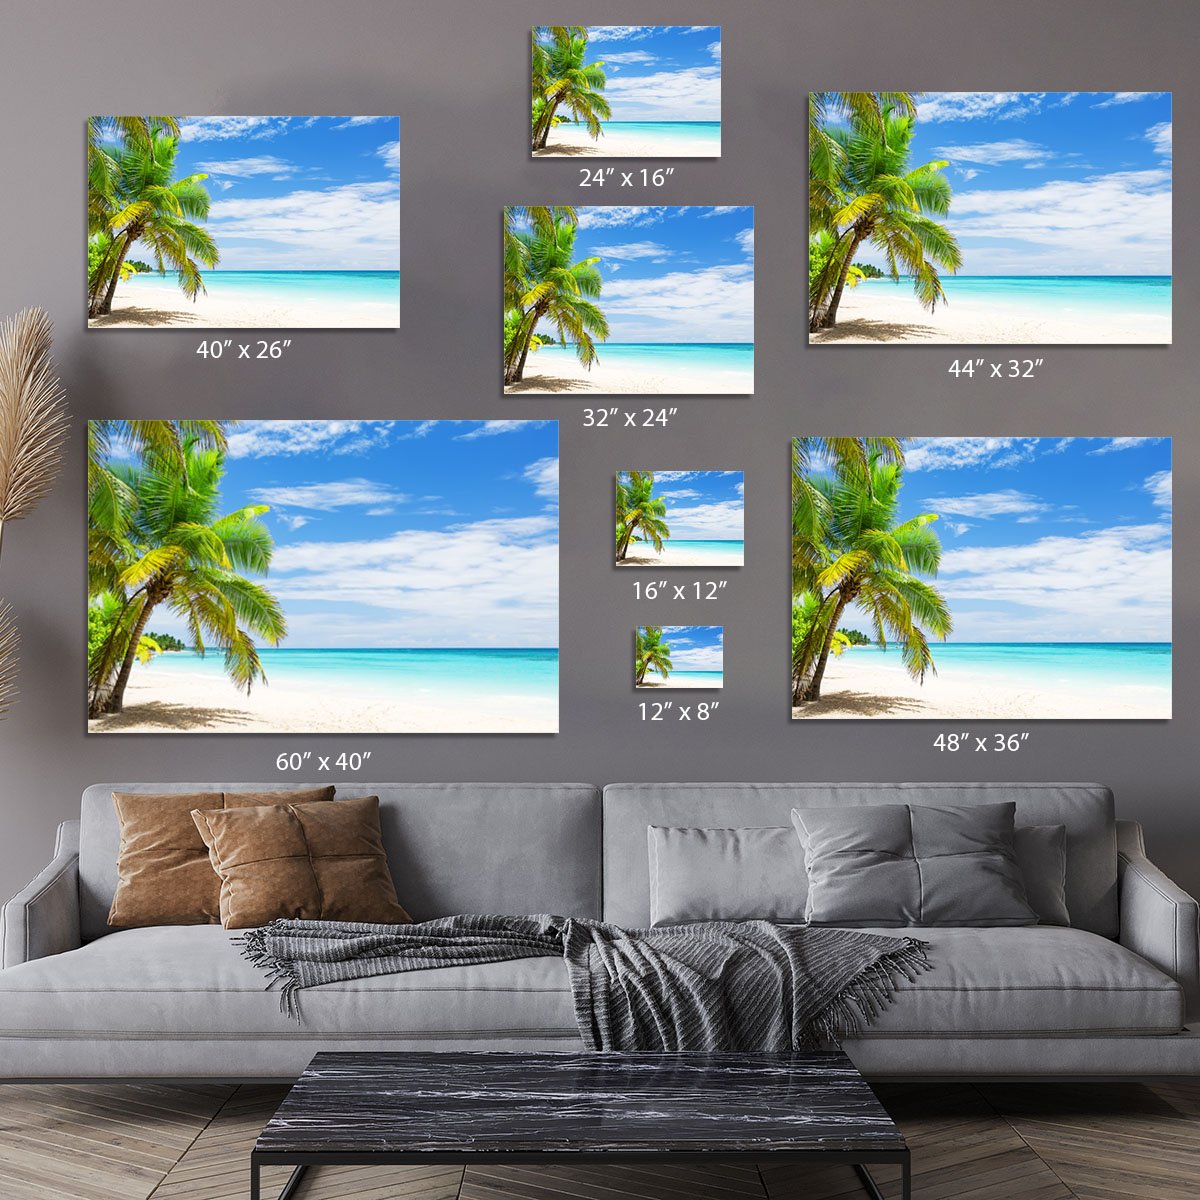 Coconut Palm trees on white sandy beach Canvas Print or Poster